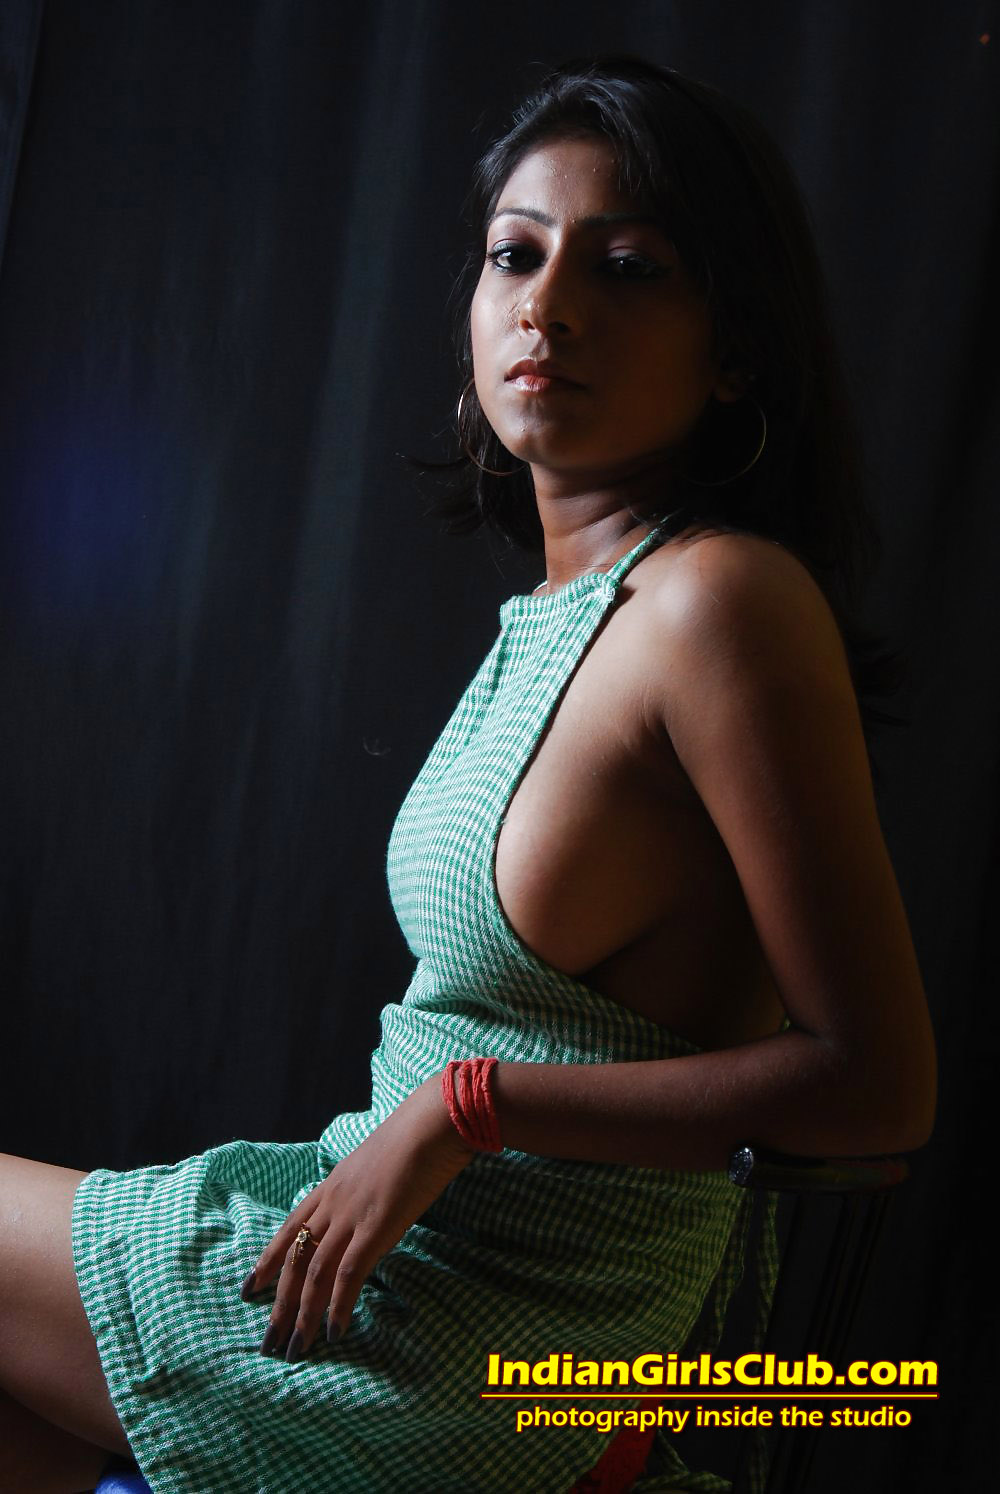 Indian Girls Nude Photography Inside The Studio - Part 25